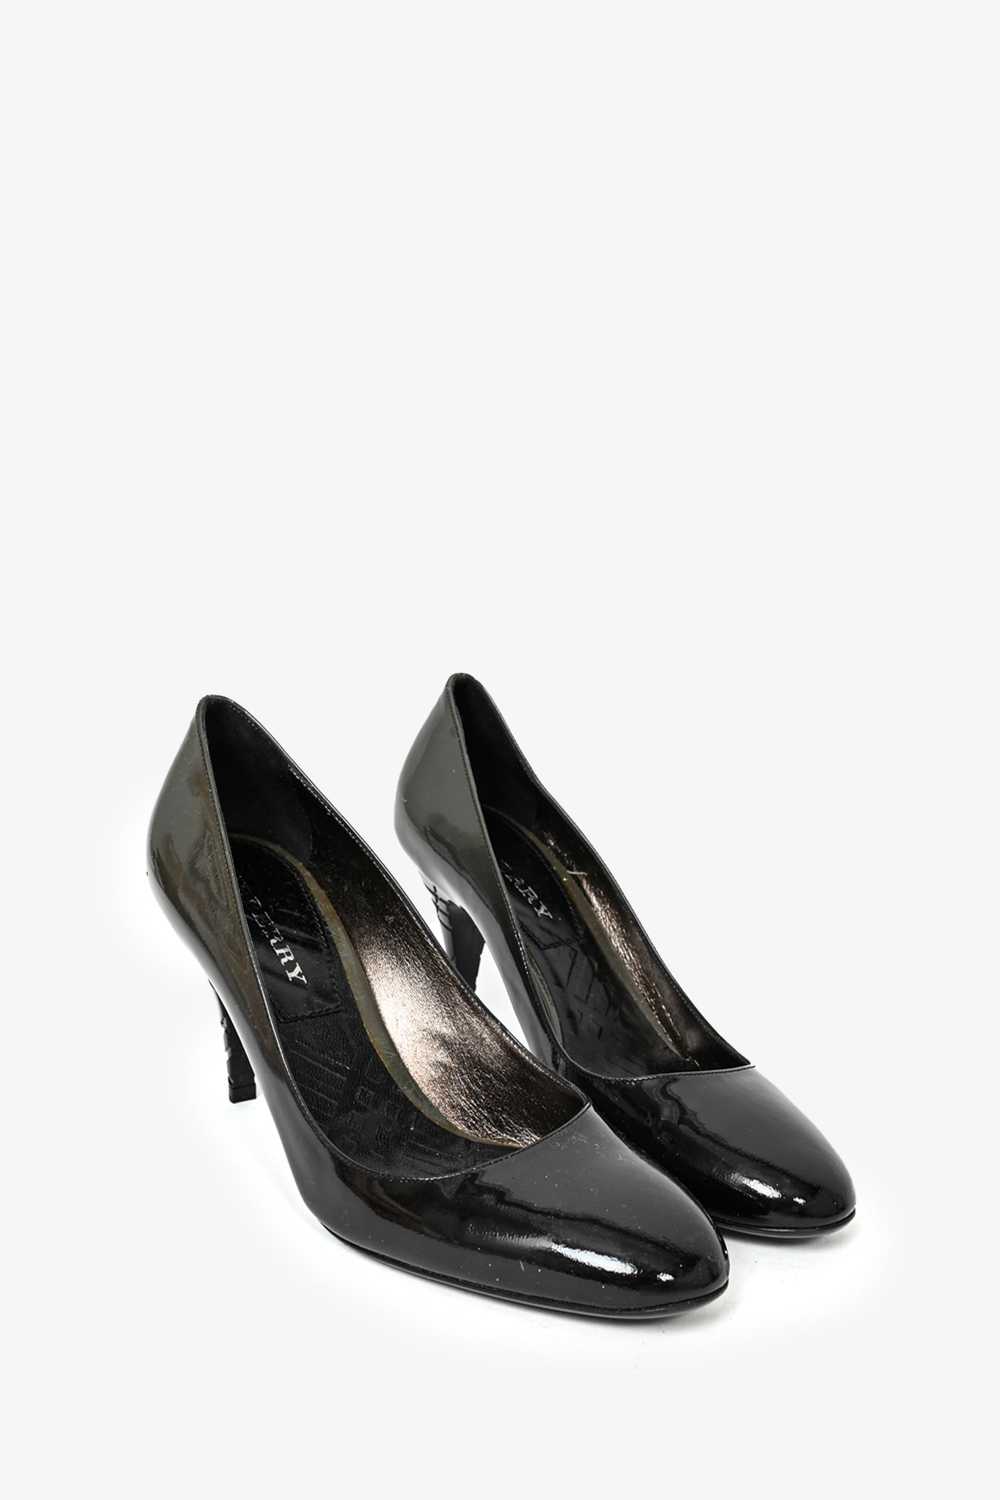 Burberry Black/Grey Patent Leather Heels Size 38 - image 2